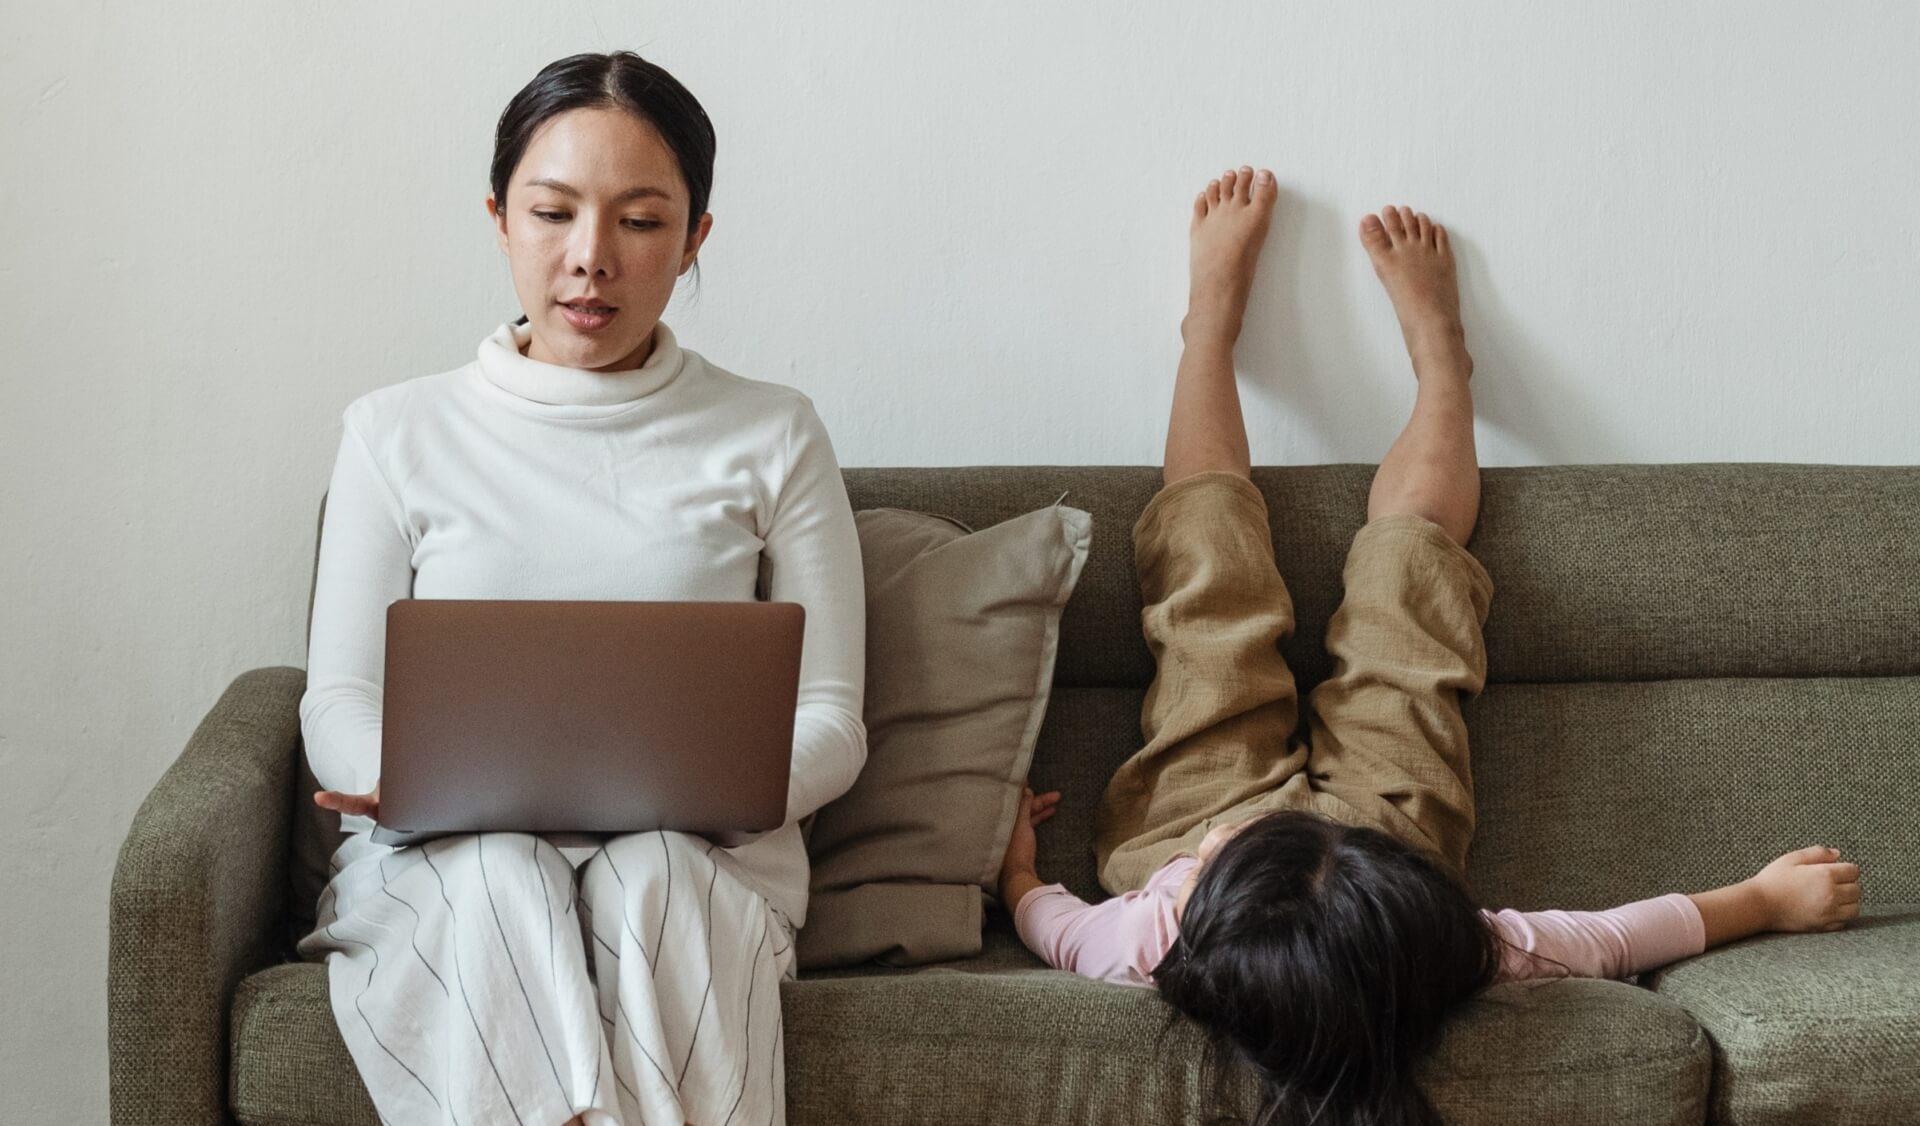 Woman working on laptop with child acting silly on the couch